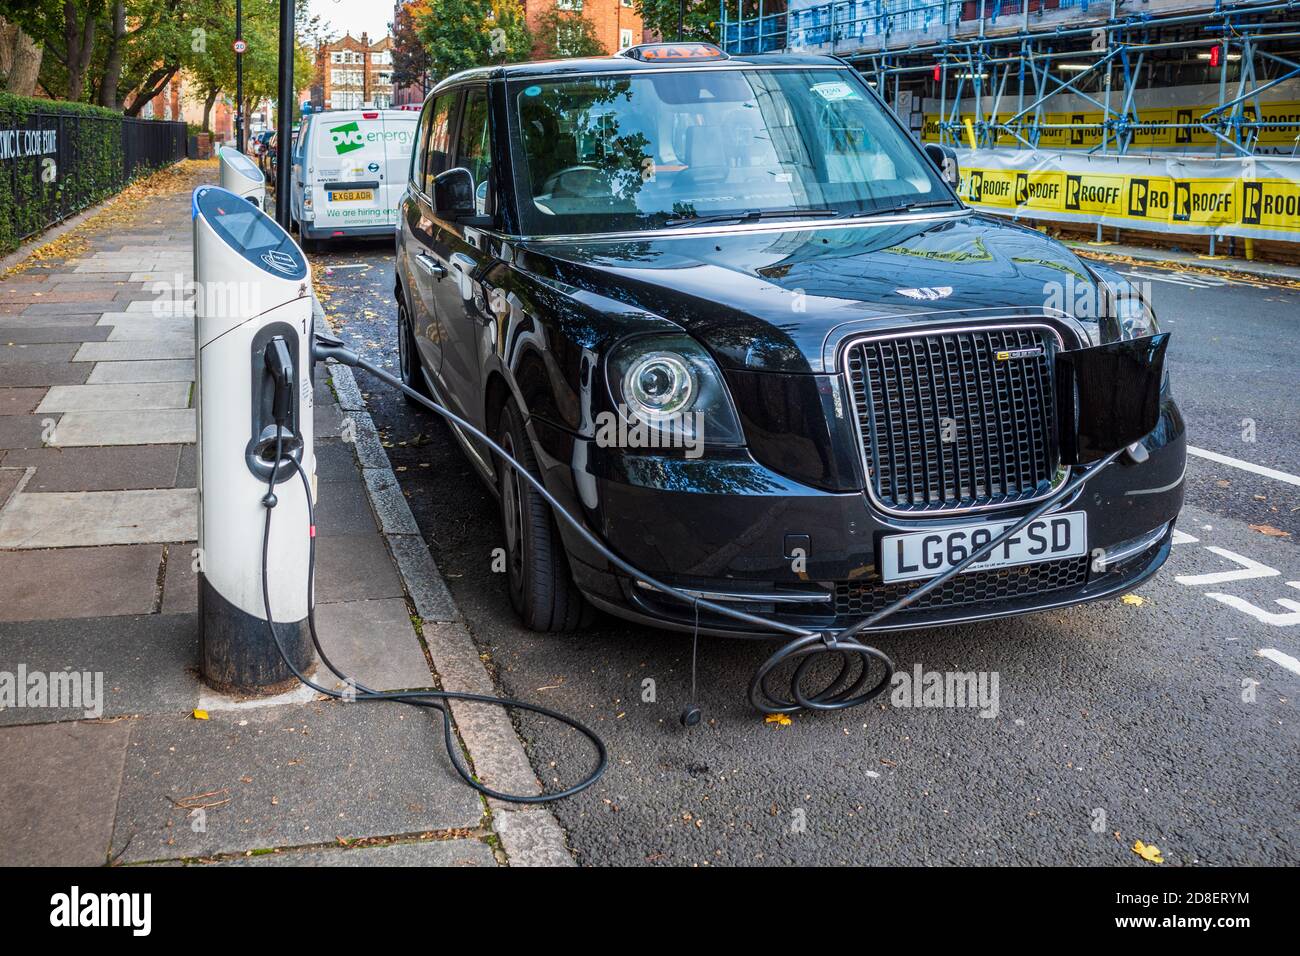 Electric Taxi Charging - LECV TX Ecity London Electric Taxi charging at a kerbside charging station. Stock Photo